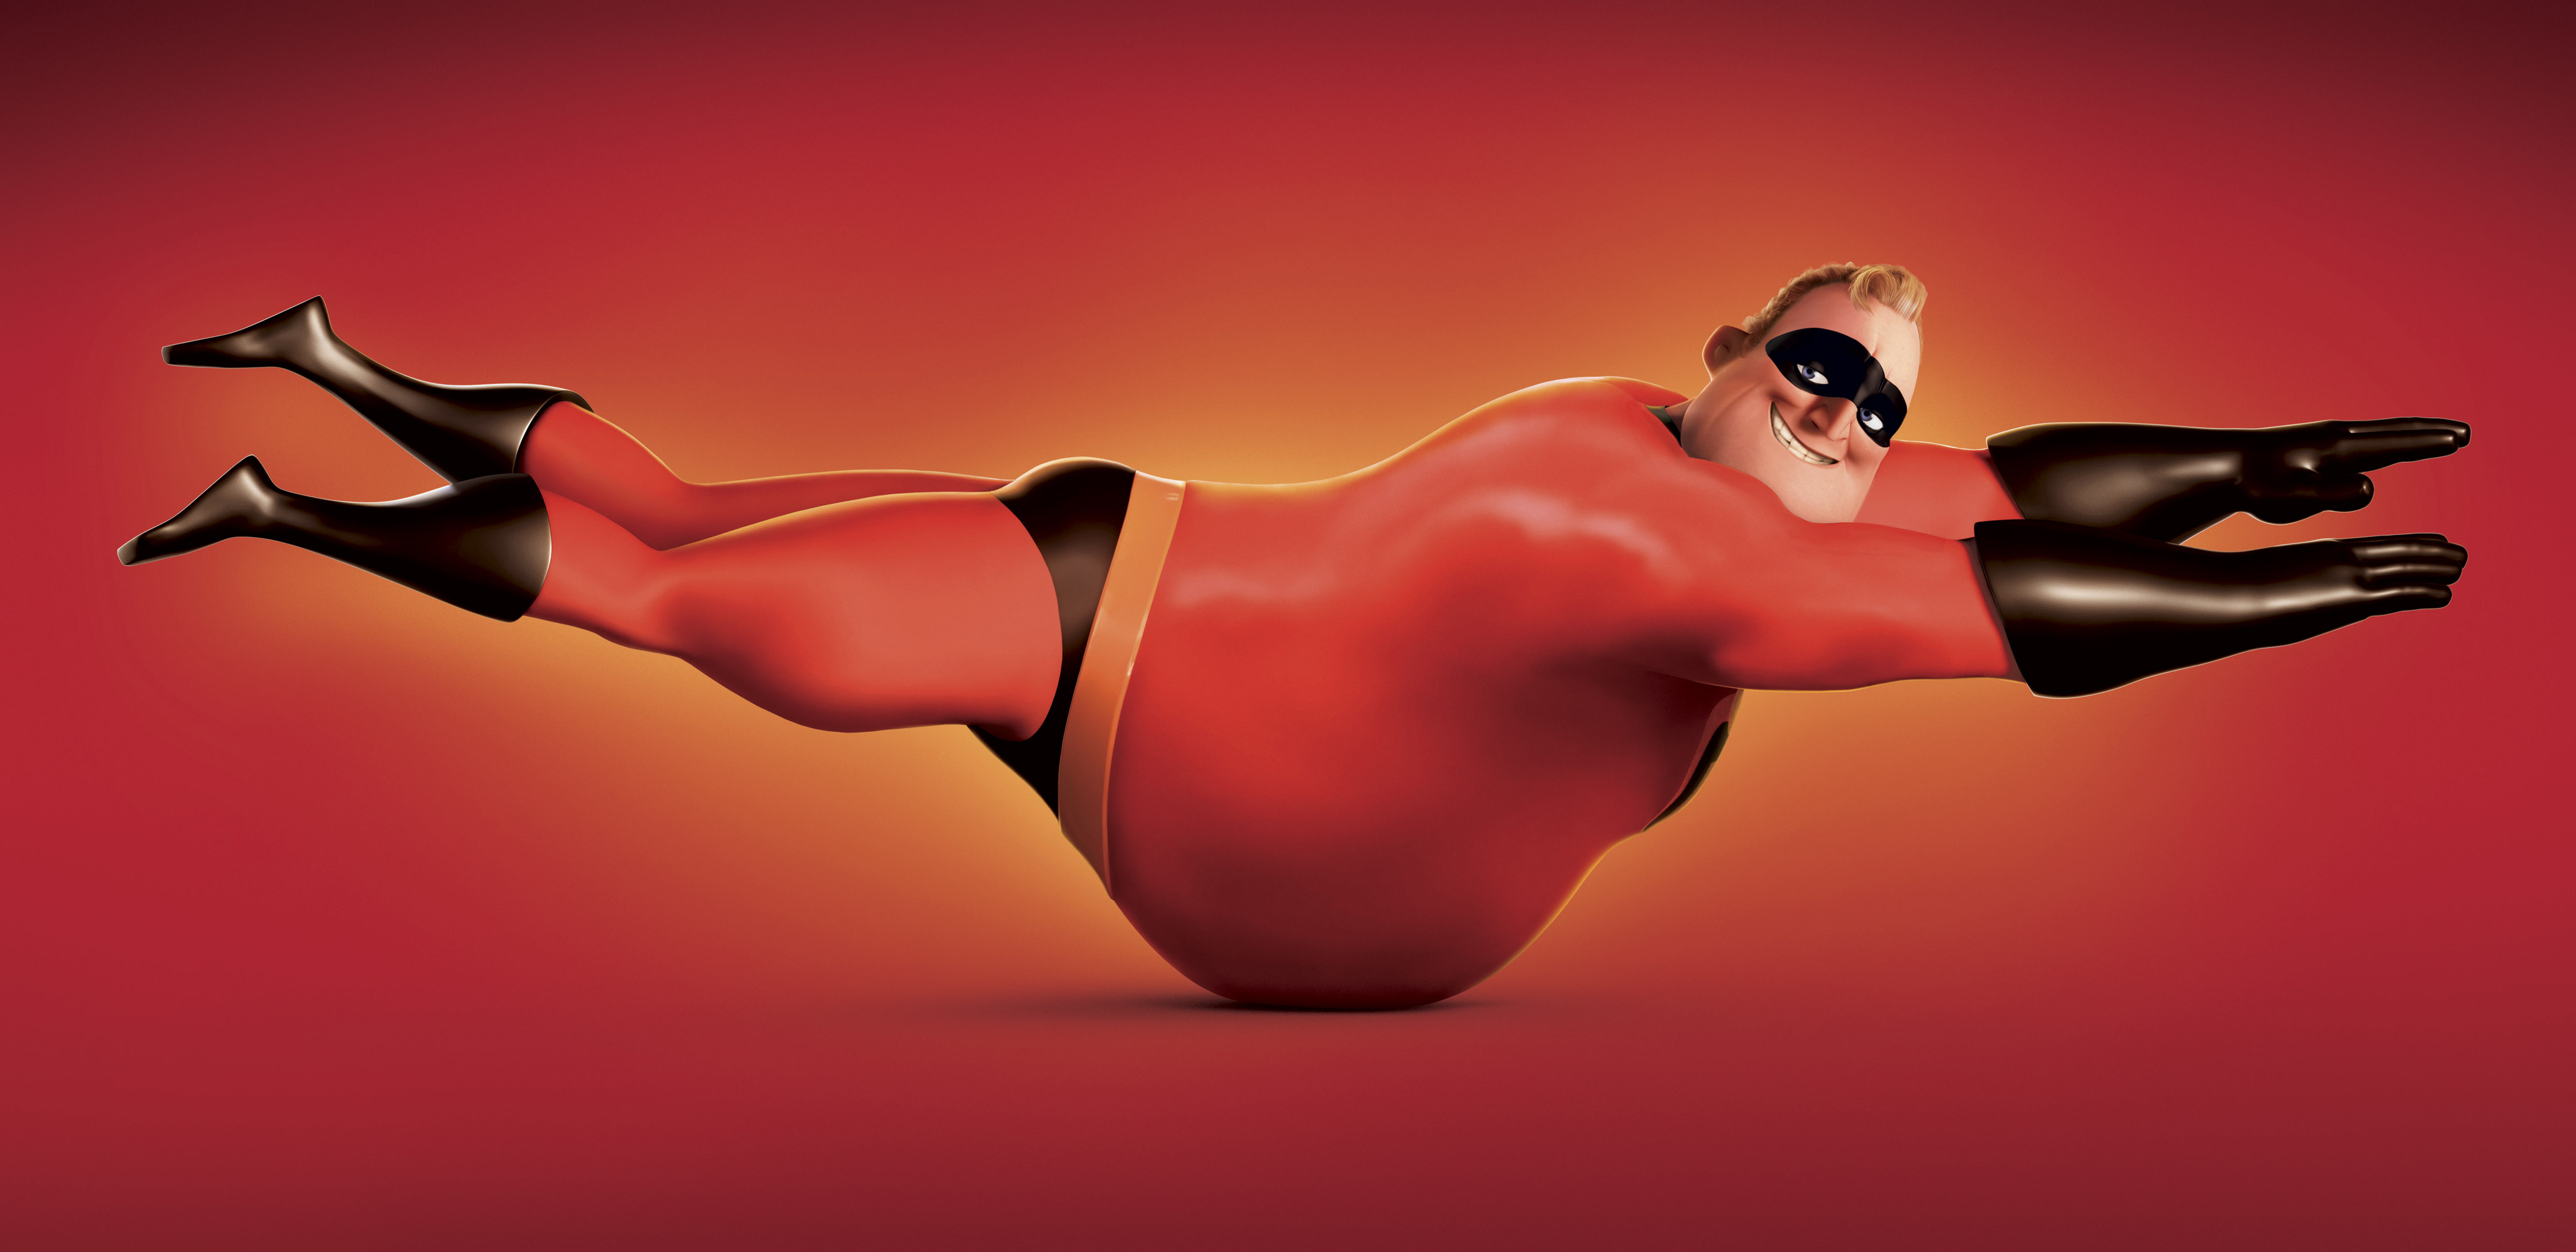 Movie Incredibles 2 HD Wallpaper | Background Image